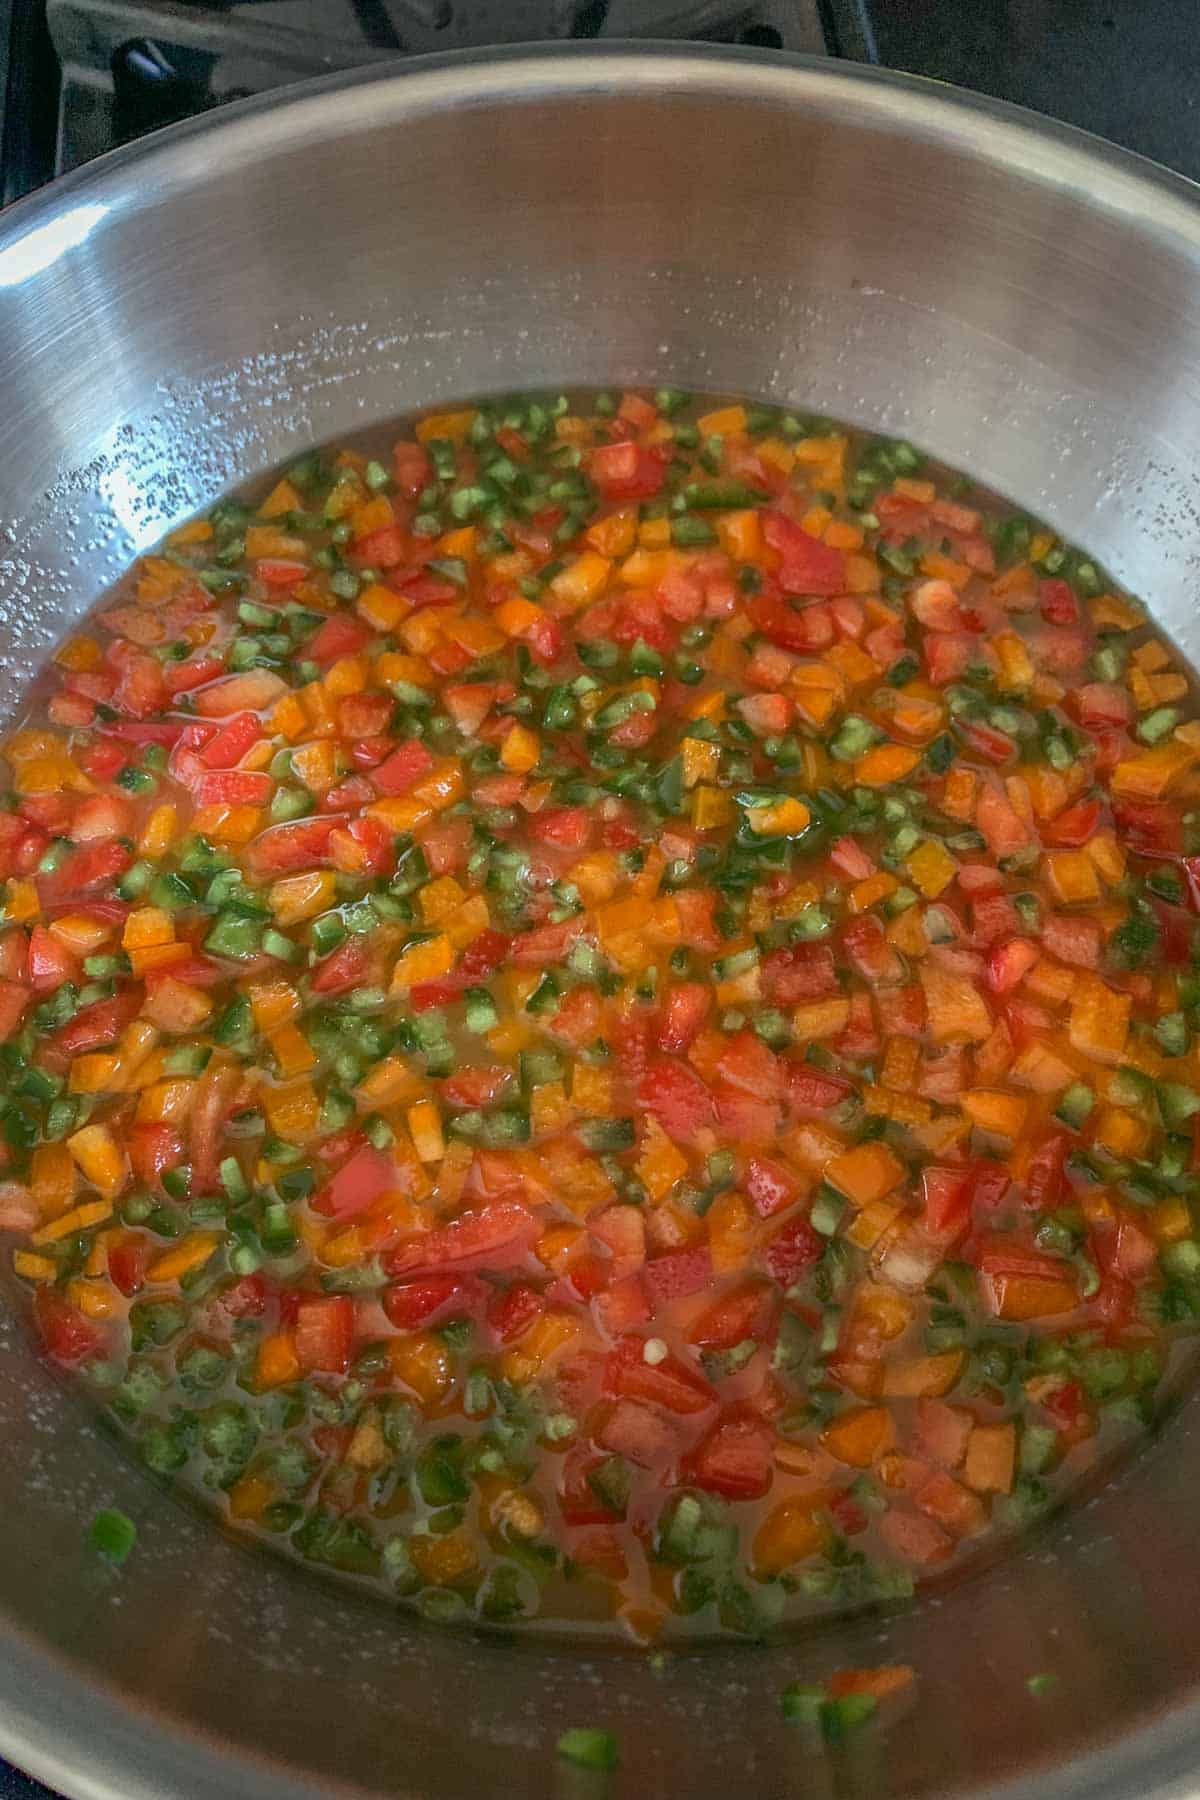 Cooking jalapeño jelly in a stainless pan.